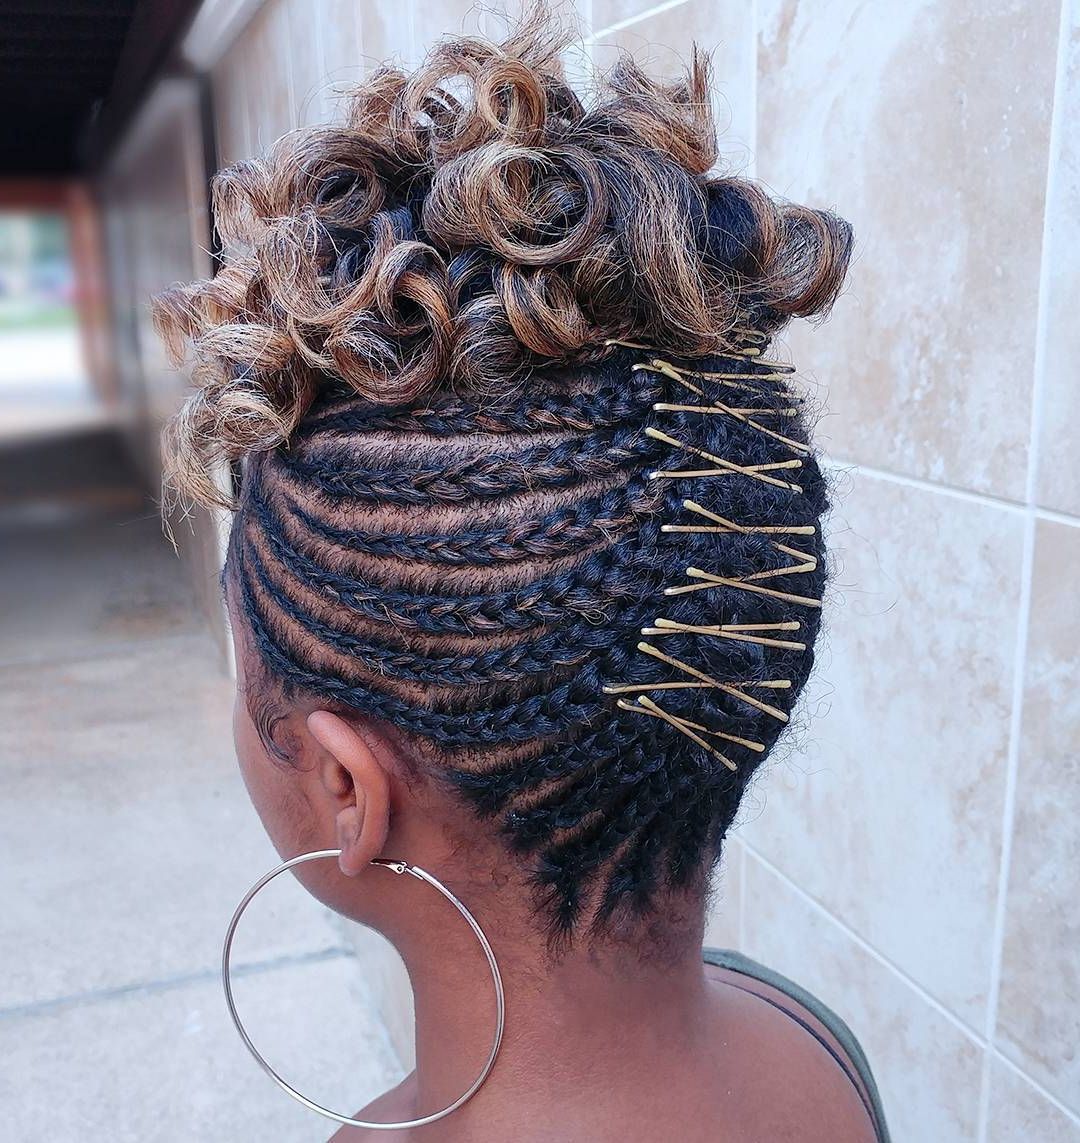 20 Braids For Curly Hair That Will Change Your Look For Popular Golden Swirl Lemonade Braided Hairstyles (View 18 of 20)